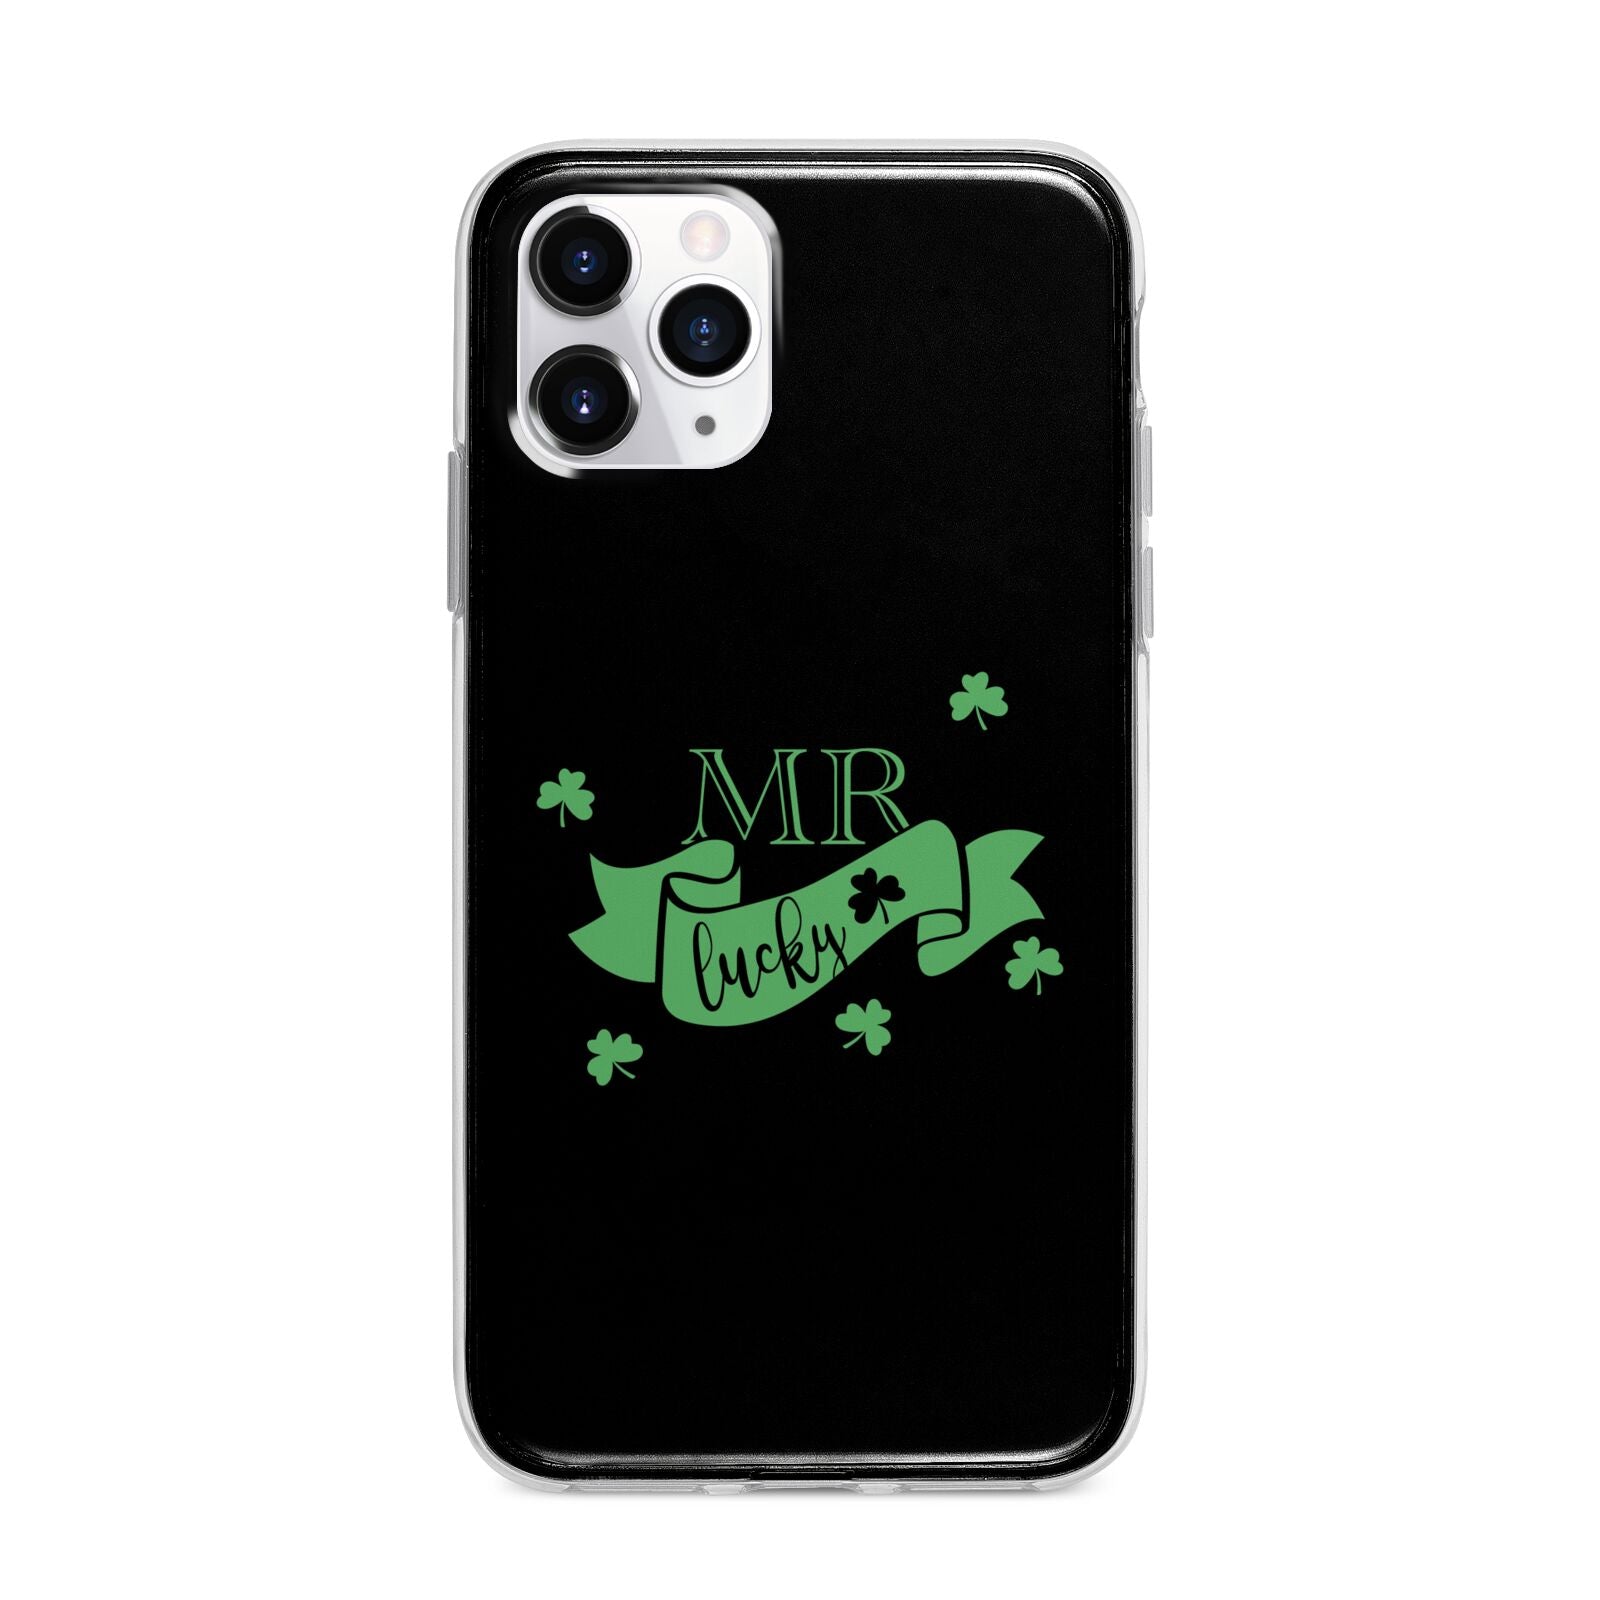 Mr Lucky Apple iPhone 11 Pro Max in Silver with Bumper Case